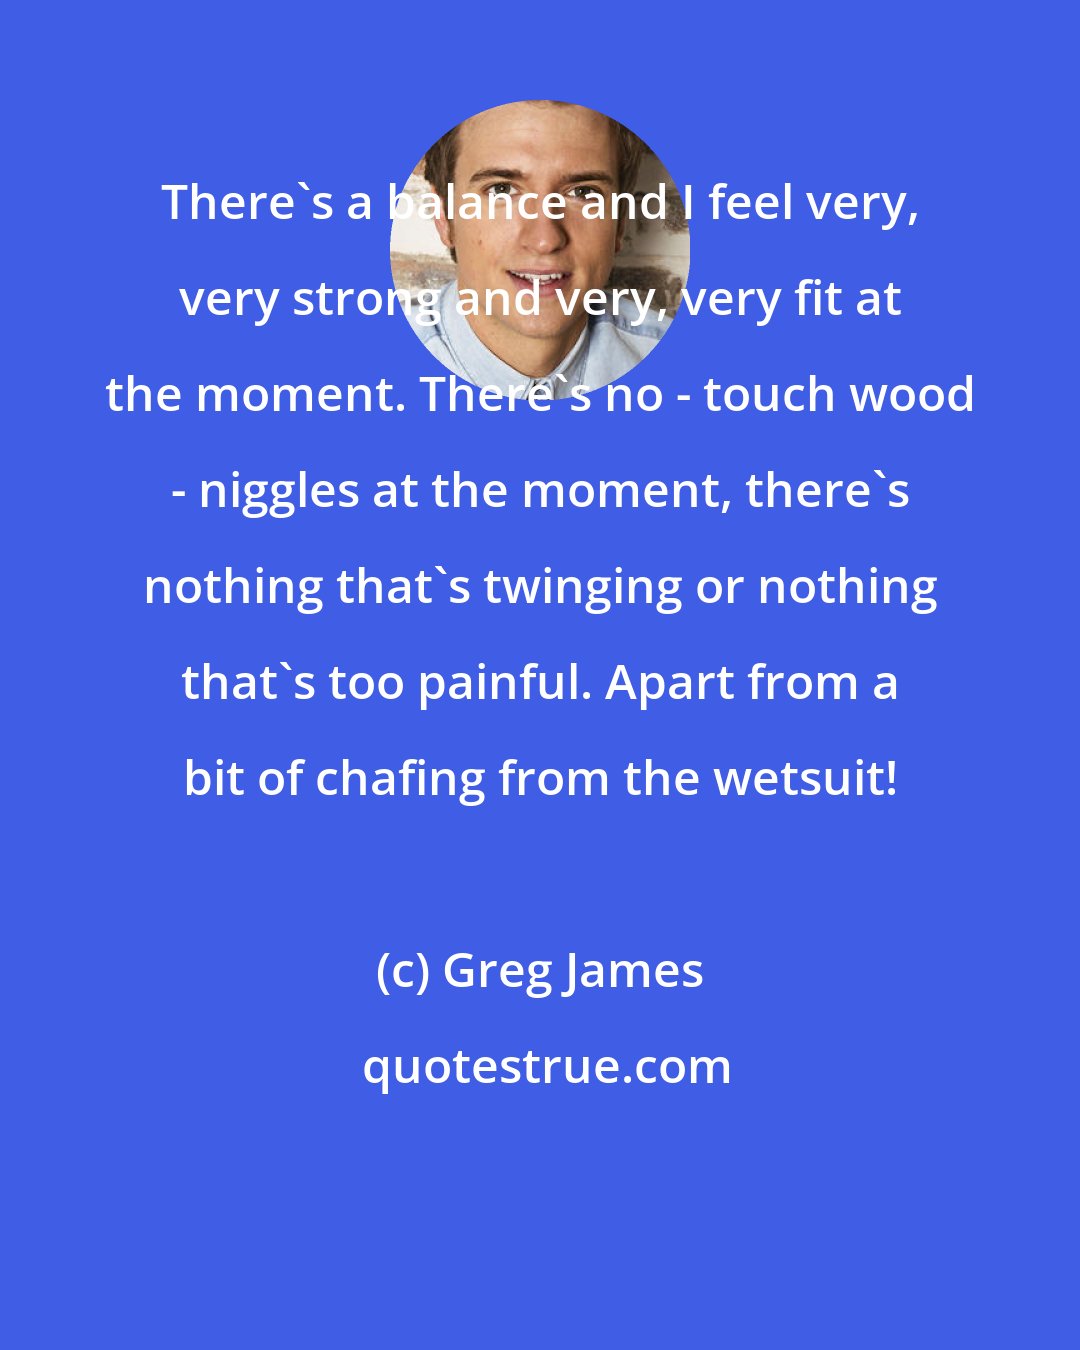 Greg James: There's a balance and I feel very, very strong and very, very fit at the moment. There's no - touch wood - niggles at the moment, there's nothing that's twinging or nothing that's too painful. Apart from a bit of chafing from the wetsuit!